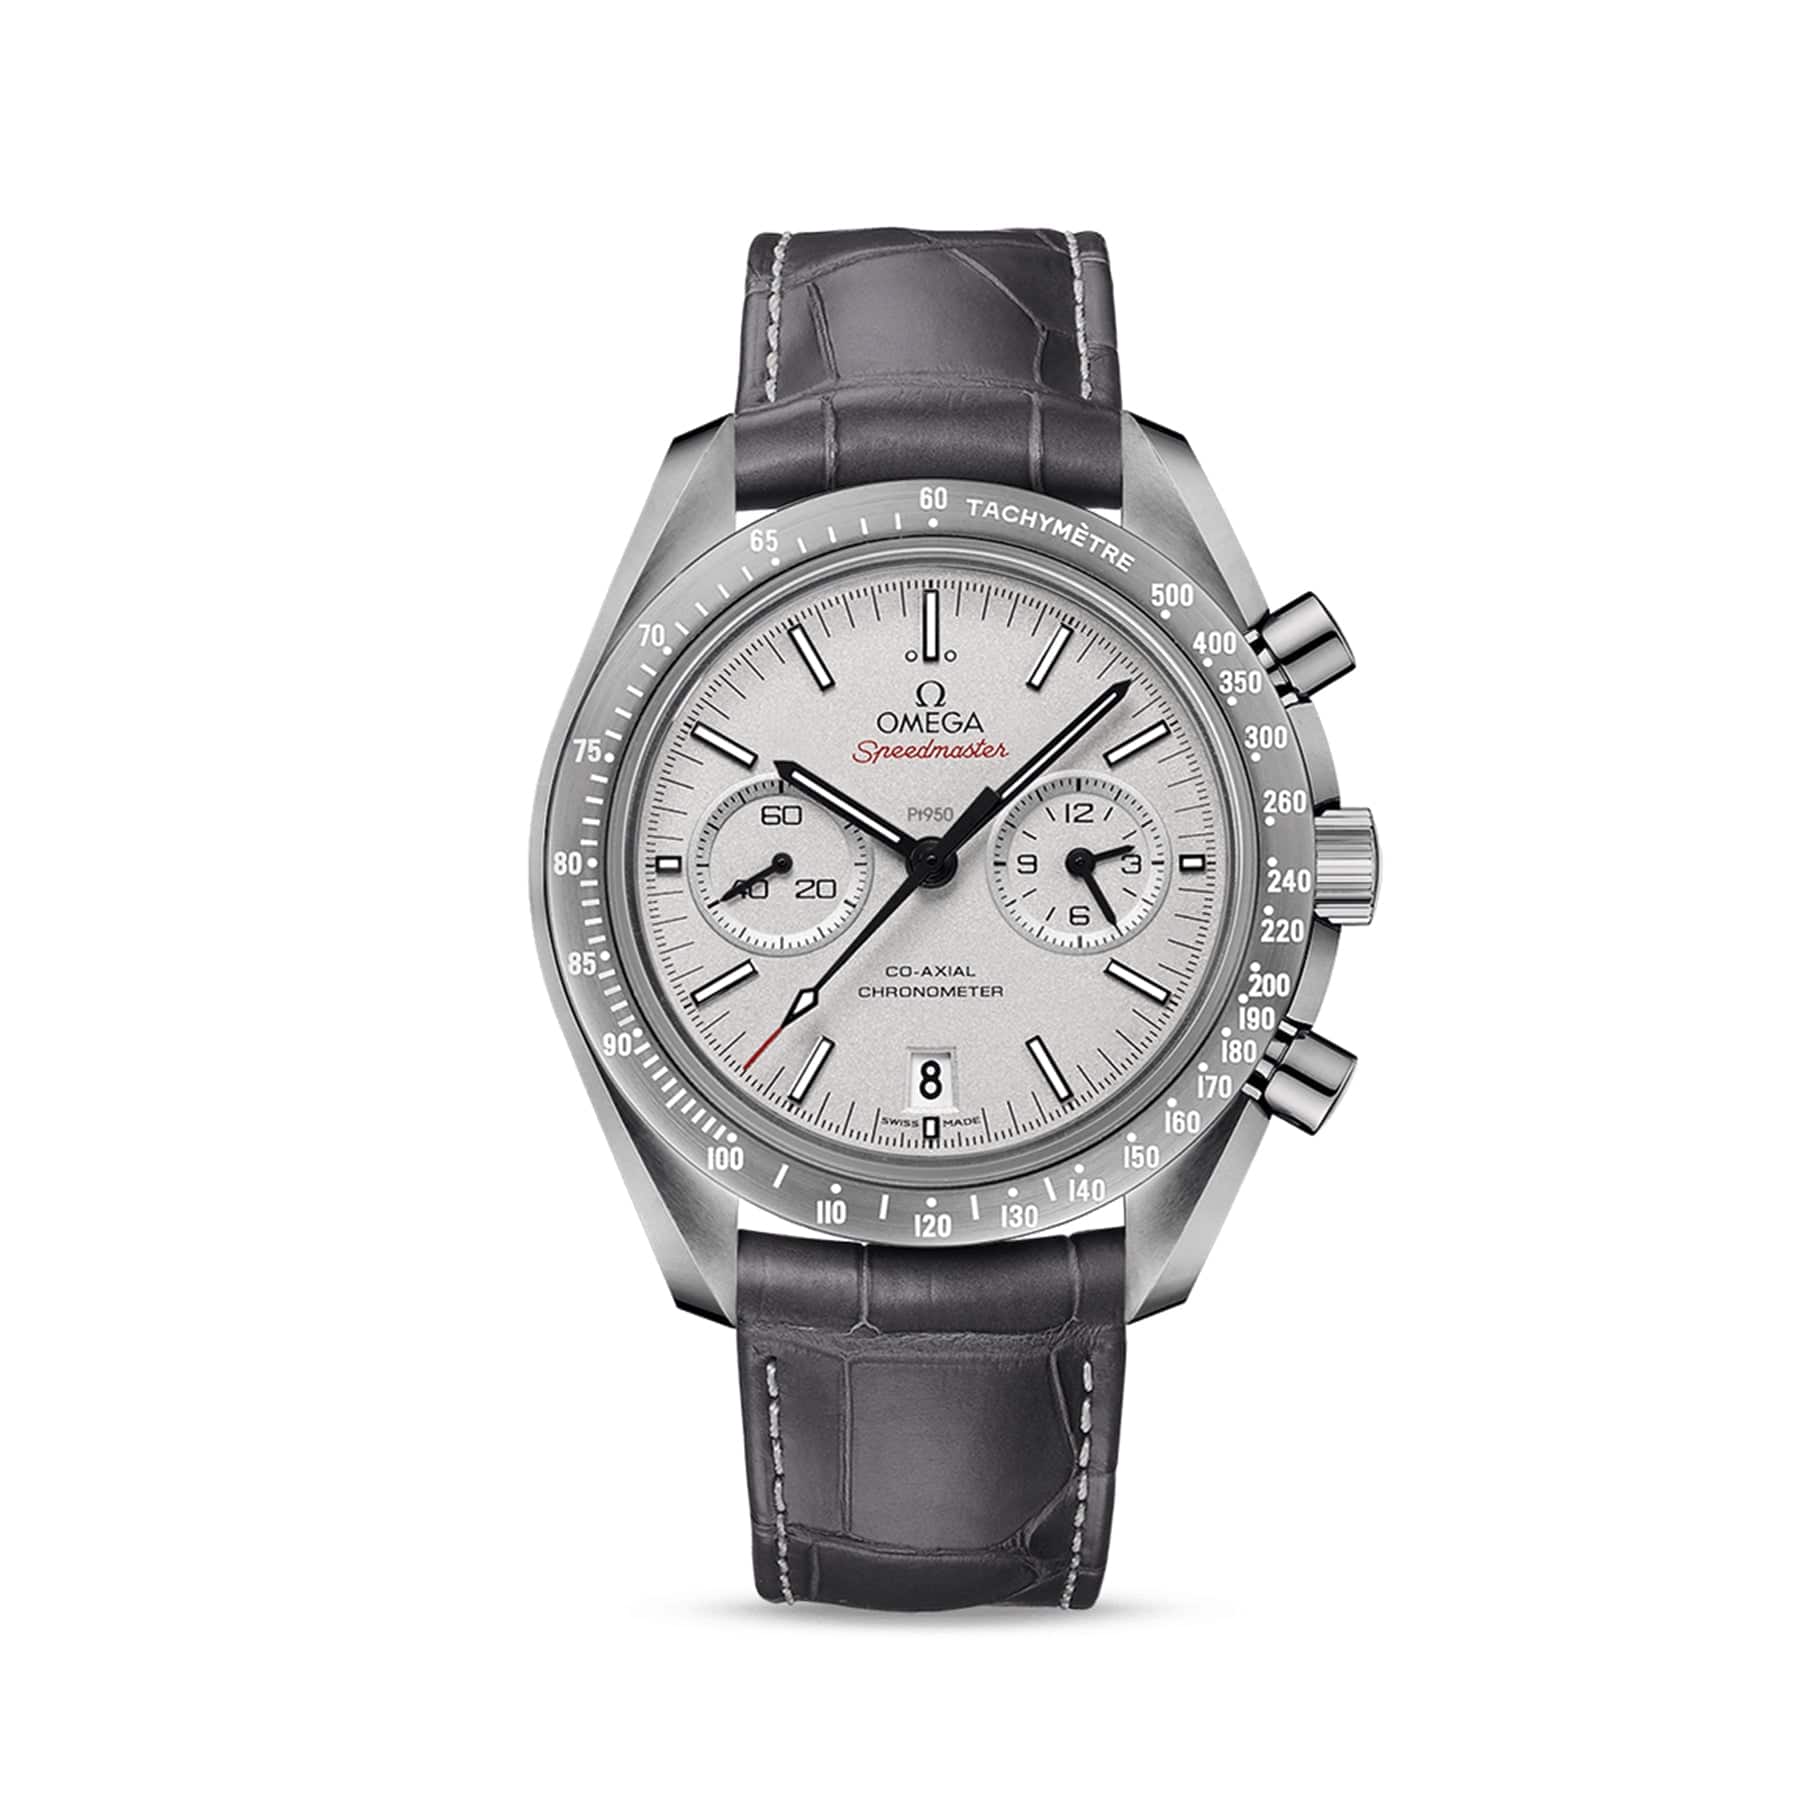 OMEGA Speedmaster Dark Side of the Moon Co-Axial Chronometer Chronograph 44.25mm 311.93.44.31.99.001